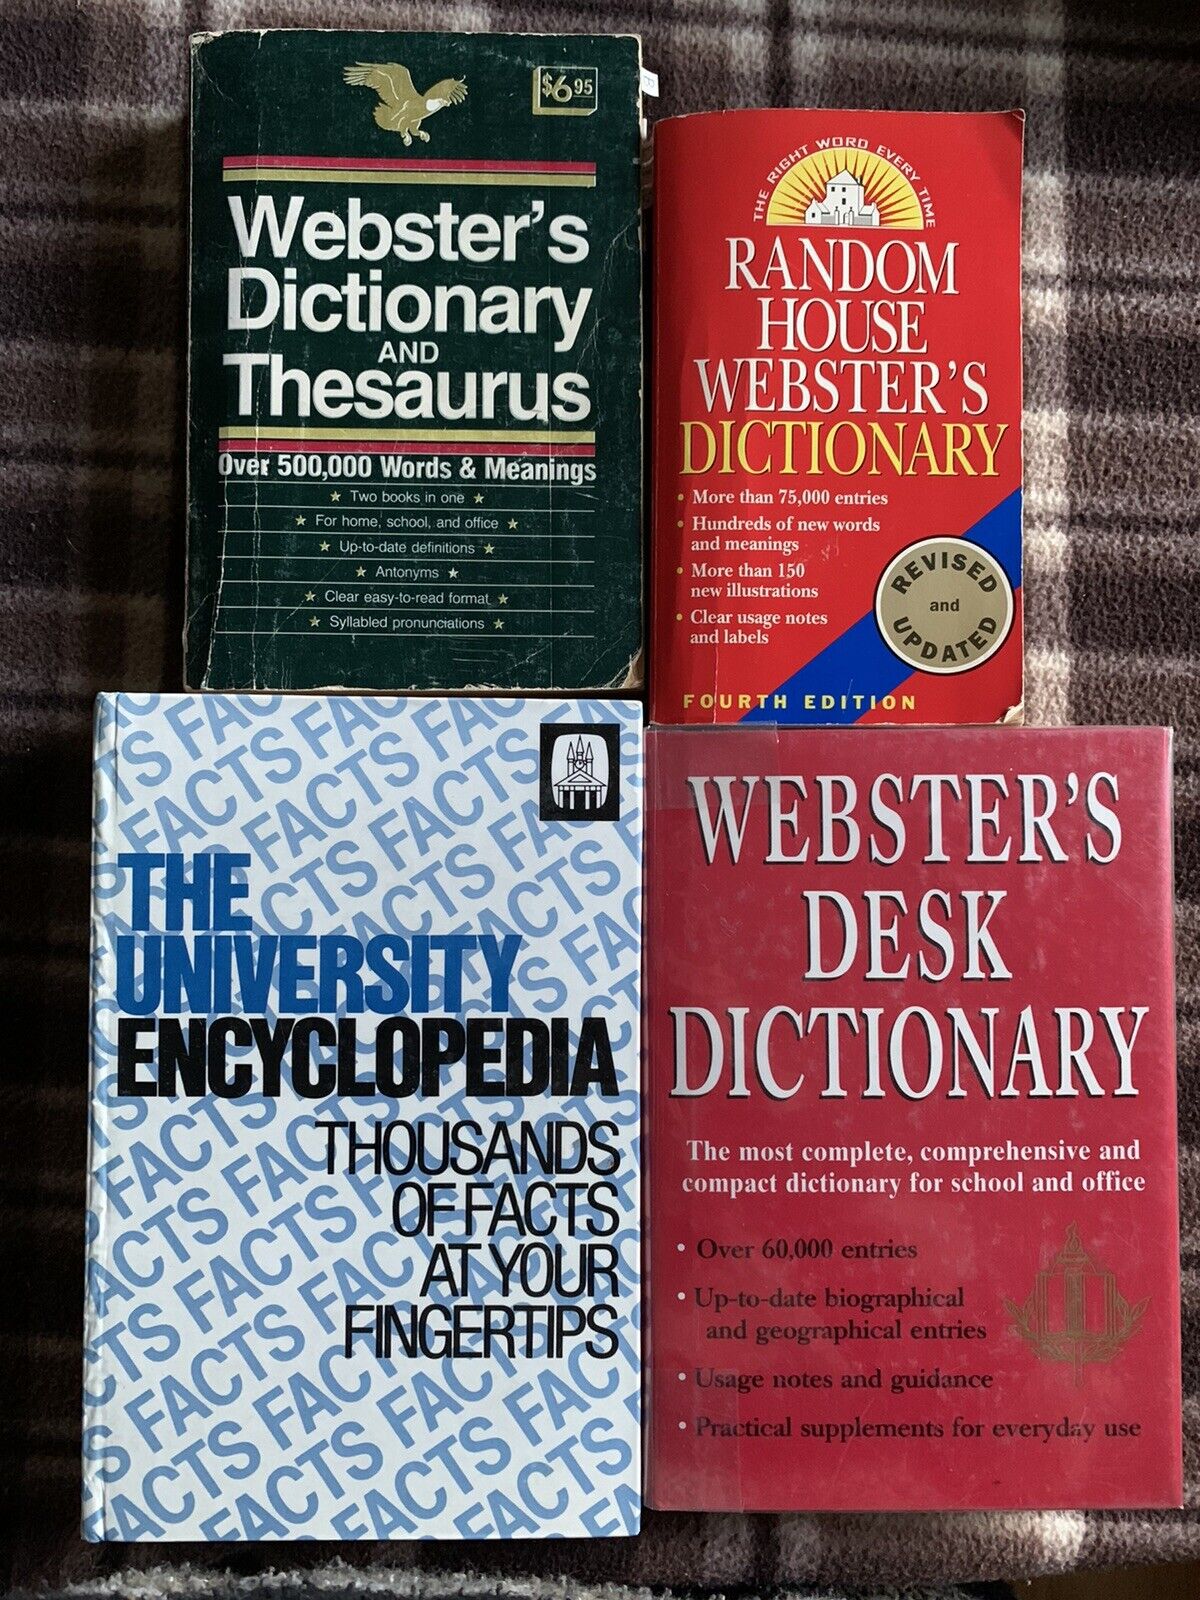 4 books Webster\'s Dictionary Thesaurus University Encyclopedia Word Meaning Lot